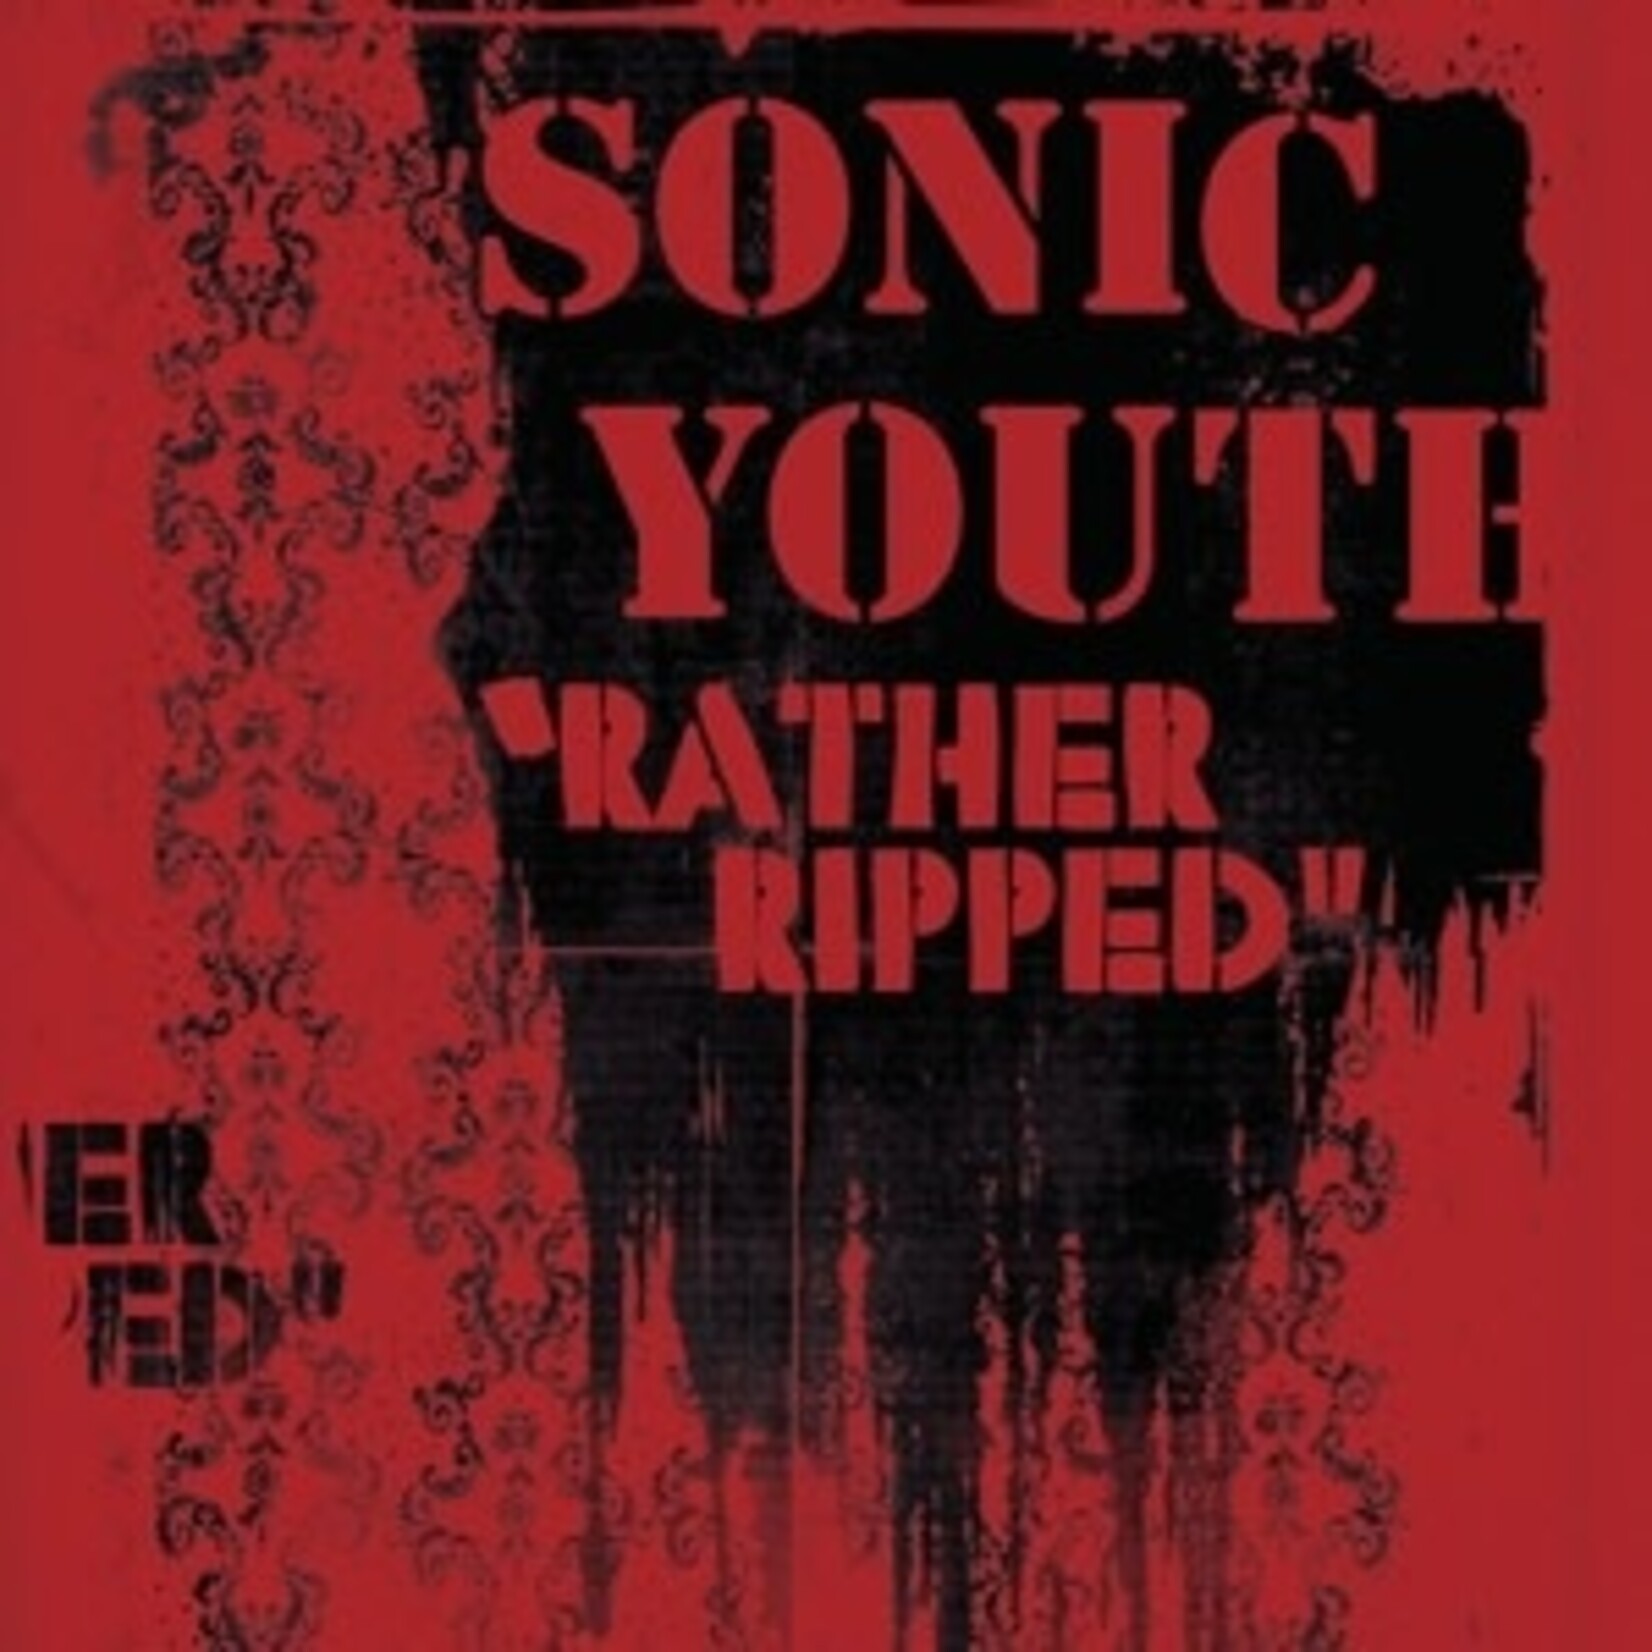 SONIC YOUTH - RATHER RIPPED -HQ-  LP